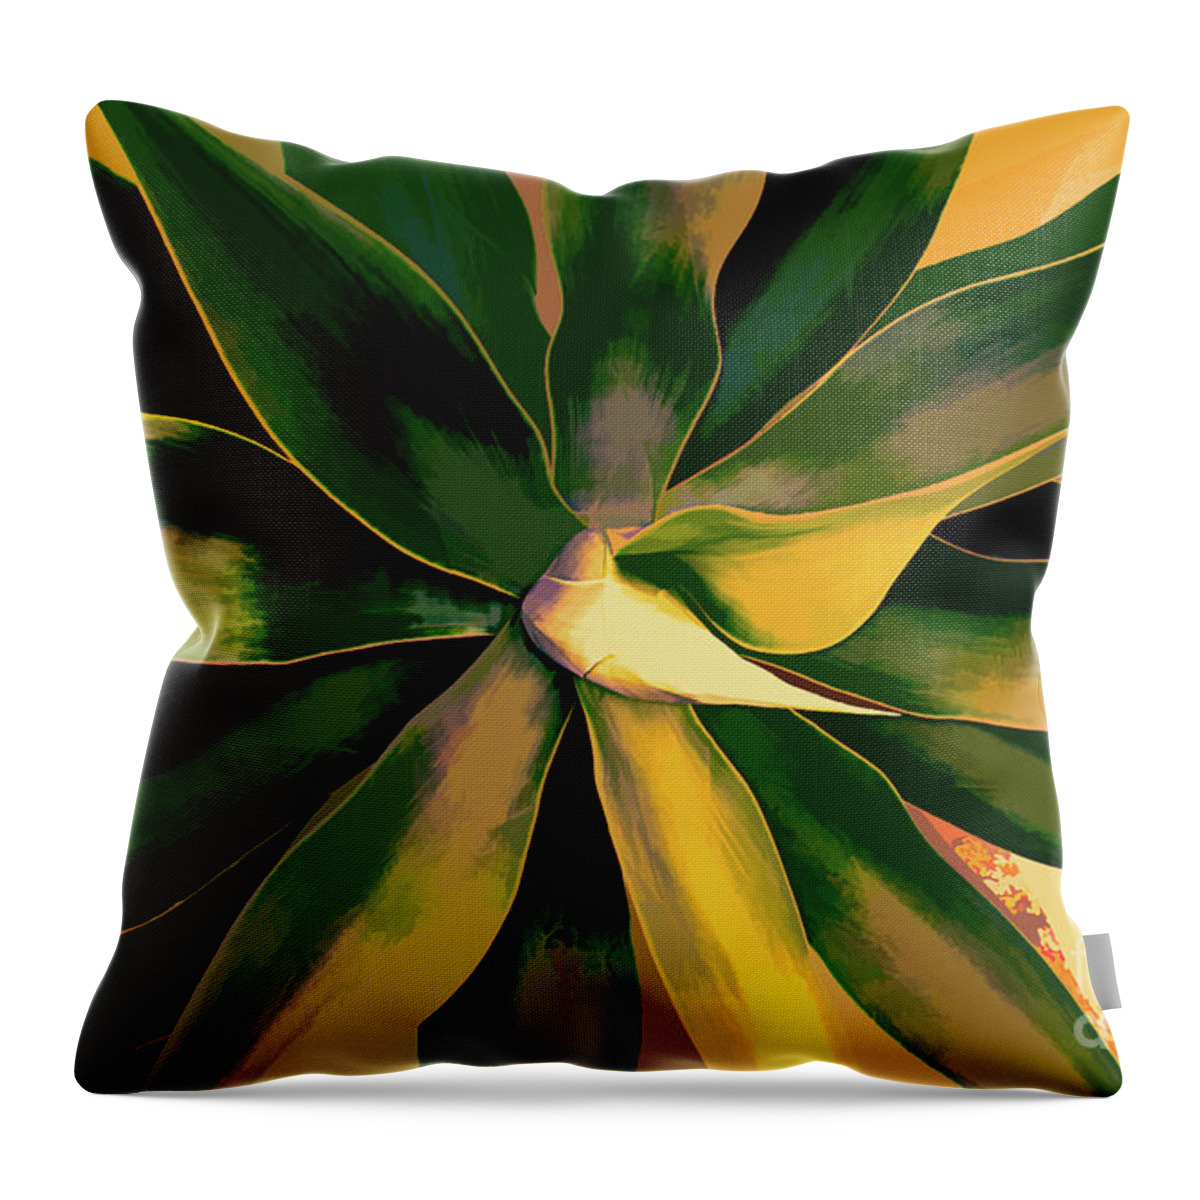 Abstract Throw Pillow featuring the photograph Agave Abstract by Roslyn Wilkins